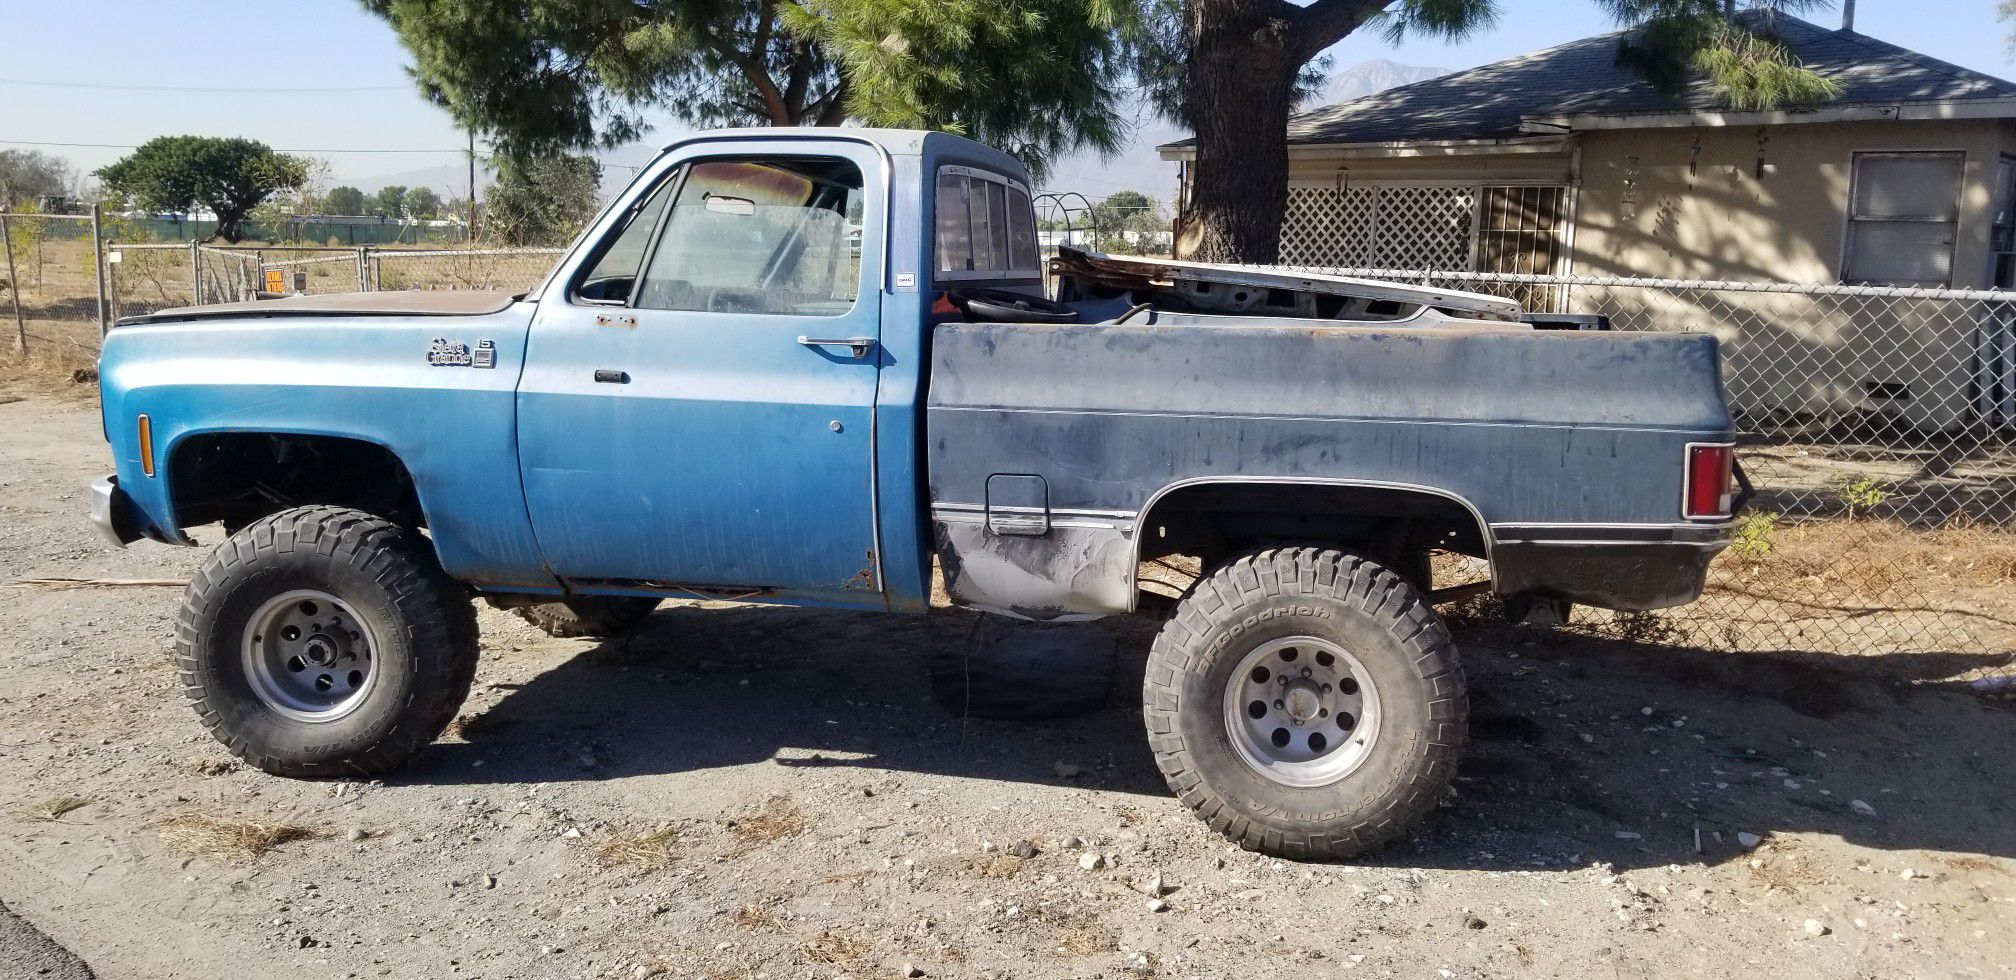 parts truck1978 street coupe gmc need to sell asap parts truck